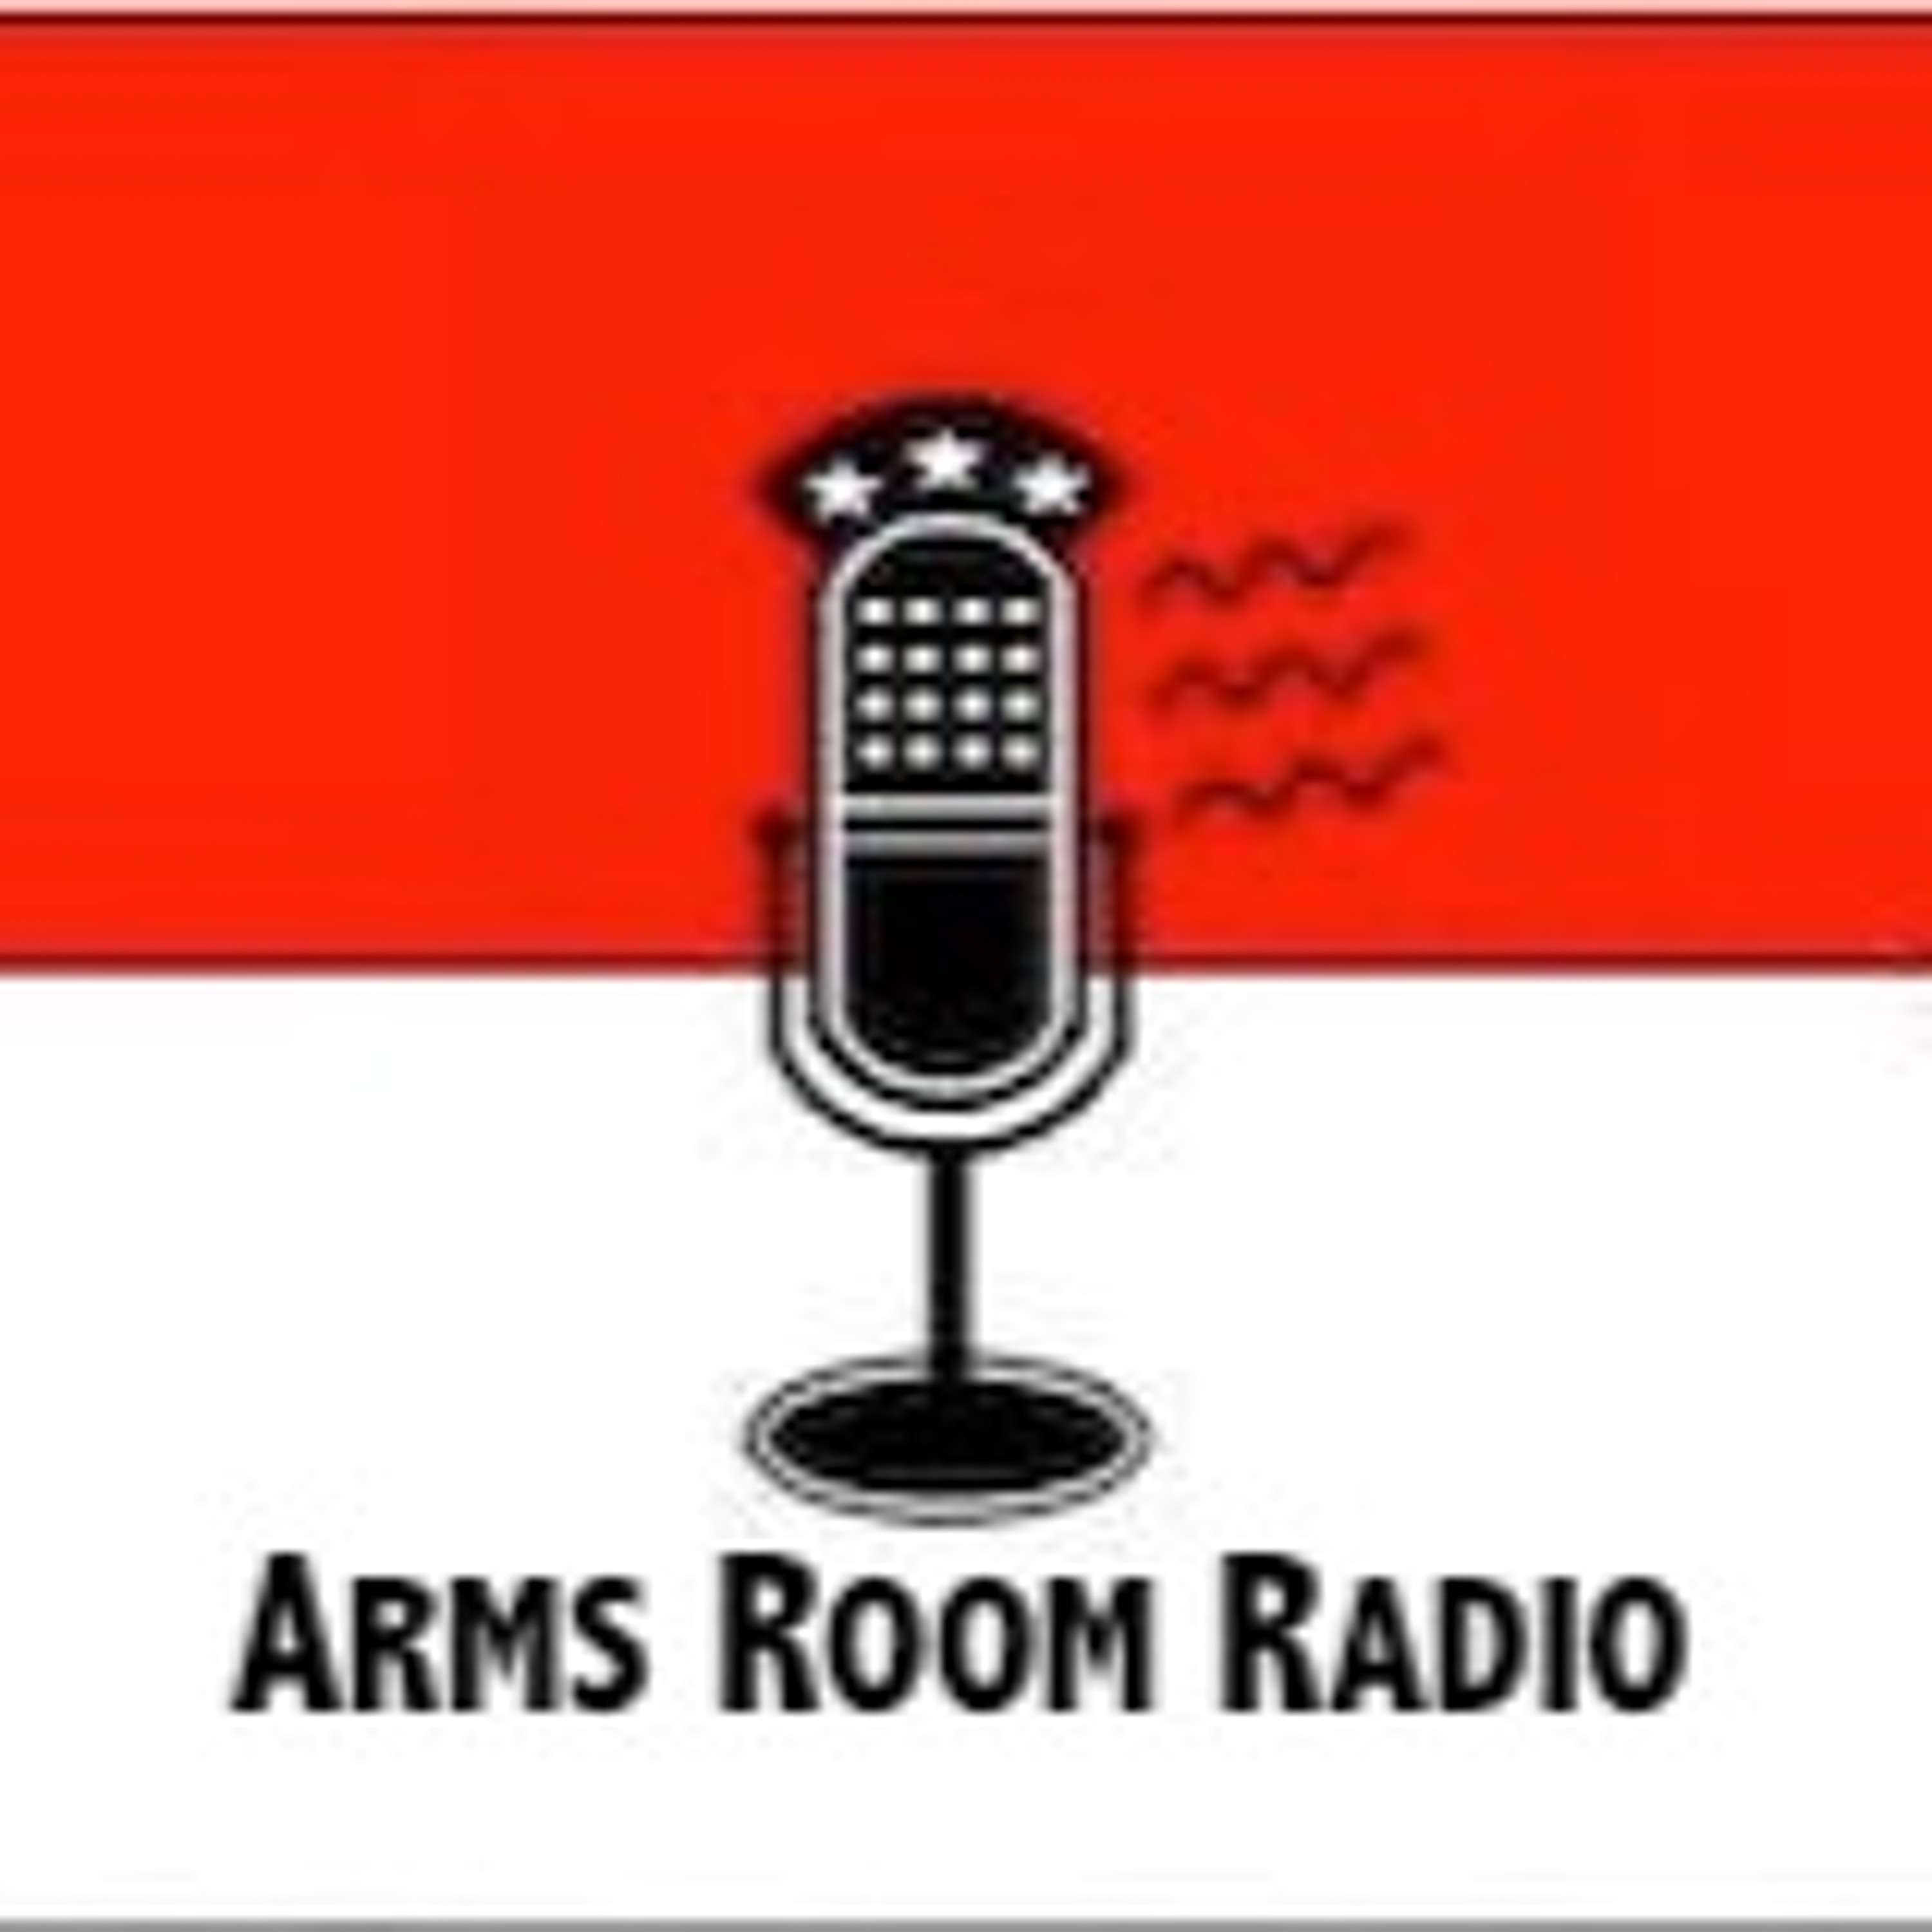 ArmsRoomRadio 11.03.18 Eric Friday, Florida Carry, Ideal Conceal